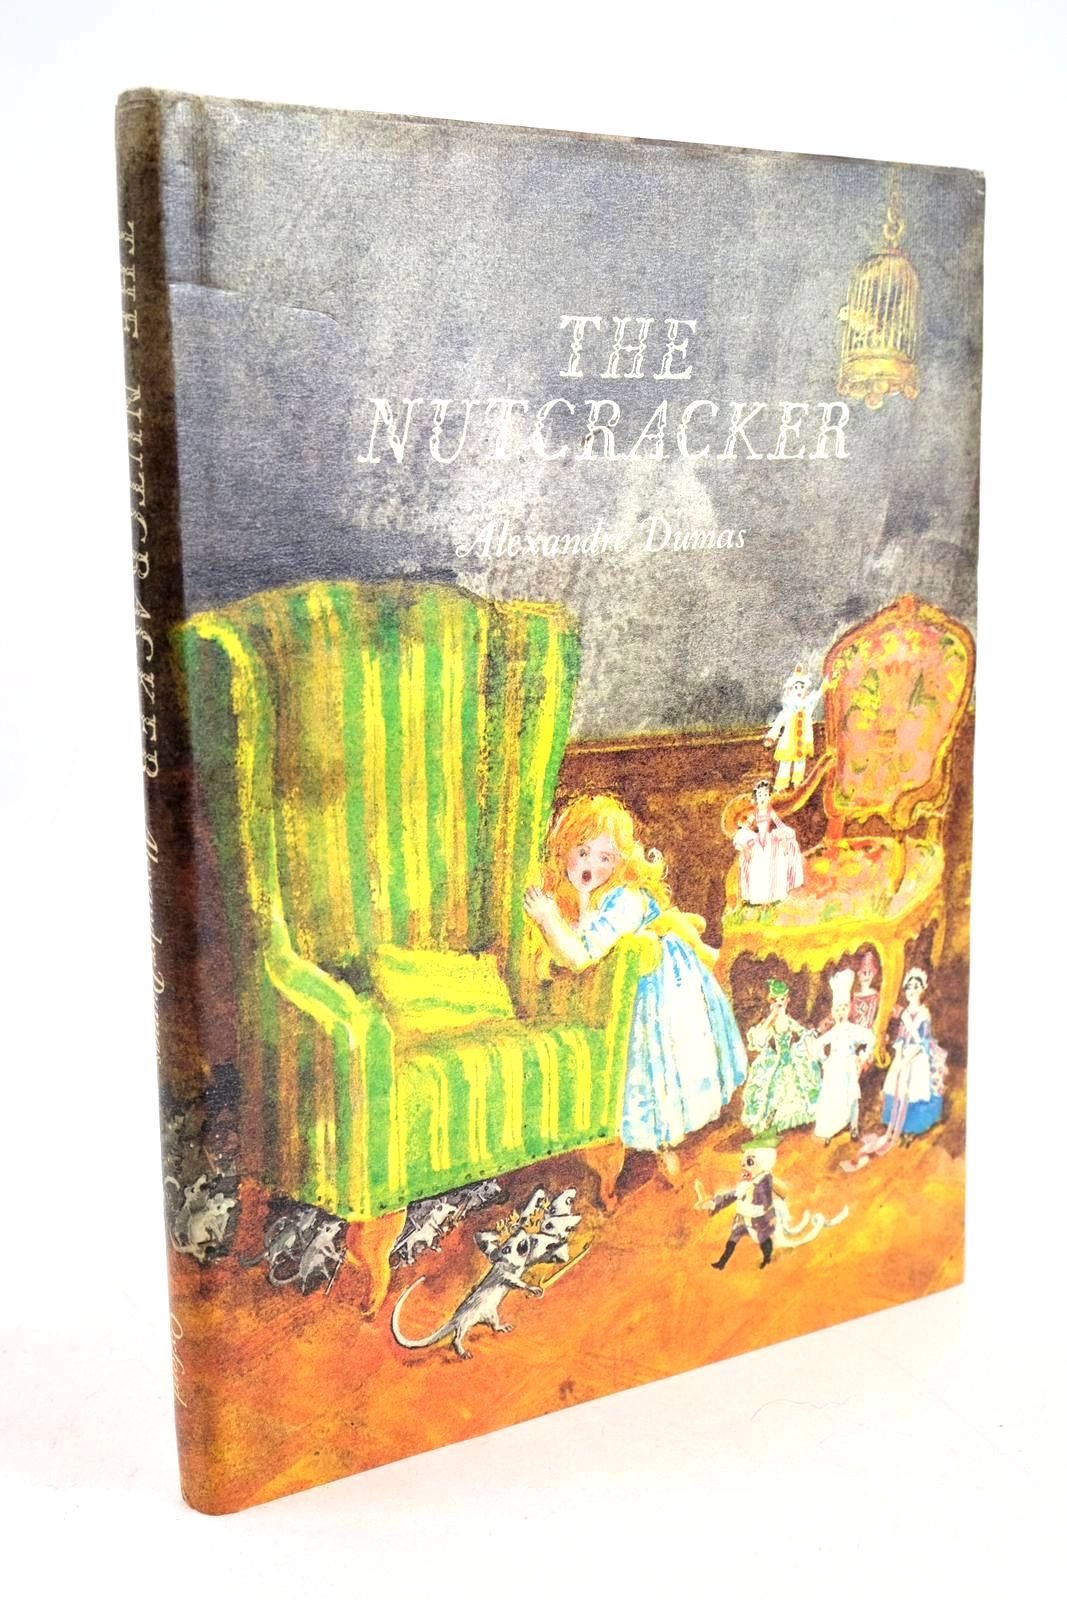 Photo of THE NUTCRACKER written by Dumas, Alexandre Munro, Douglas illustrated by Gili, Phillida published by Oxford University Press (STOCK CODE: 1327678)  for sale by Stella & Rose's Books